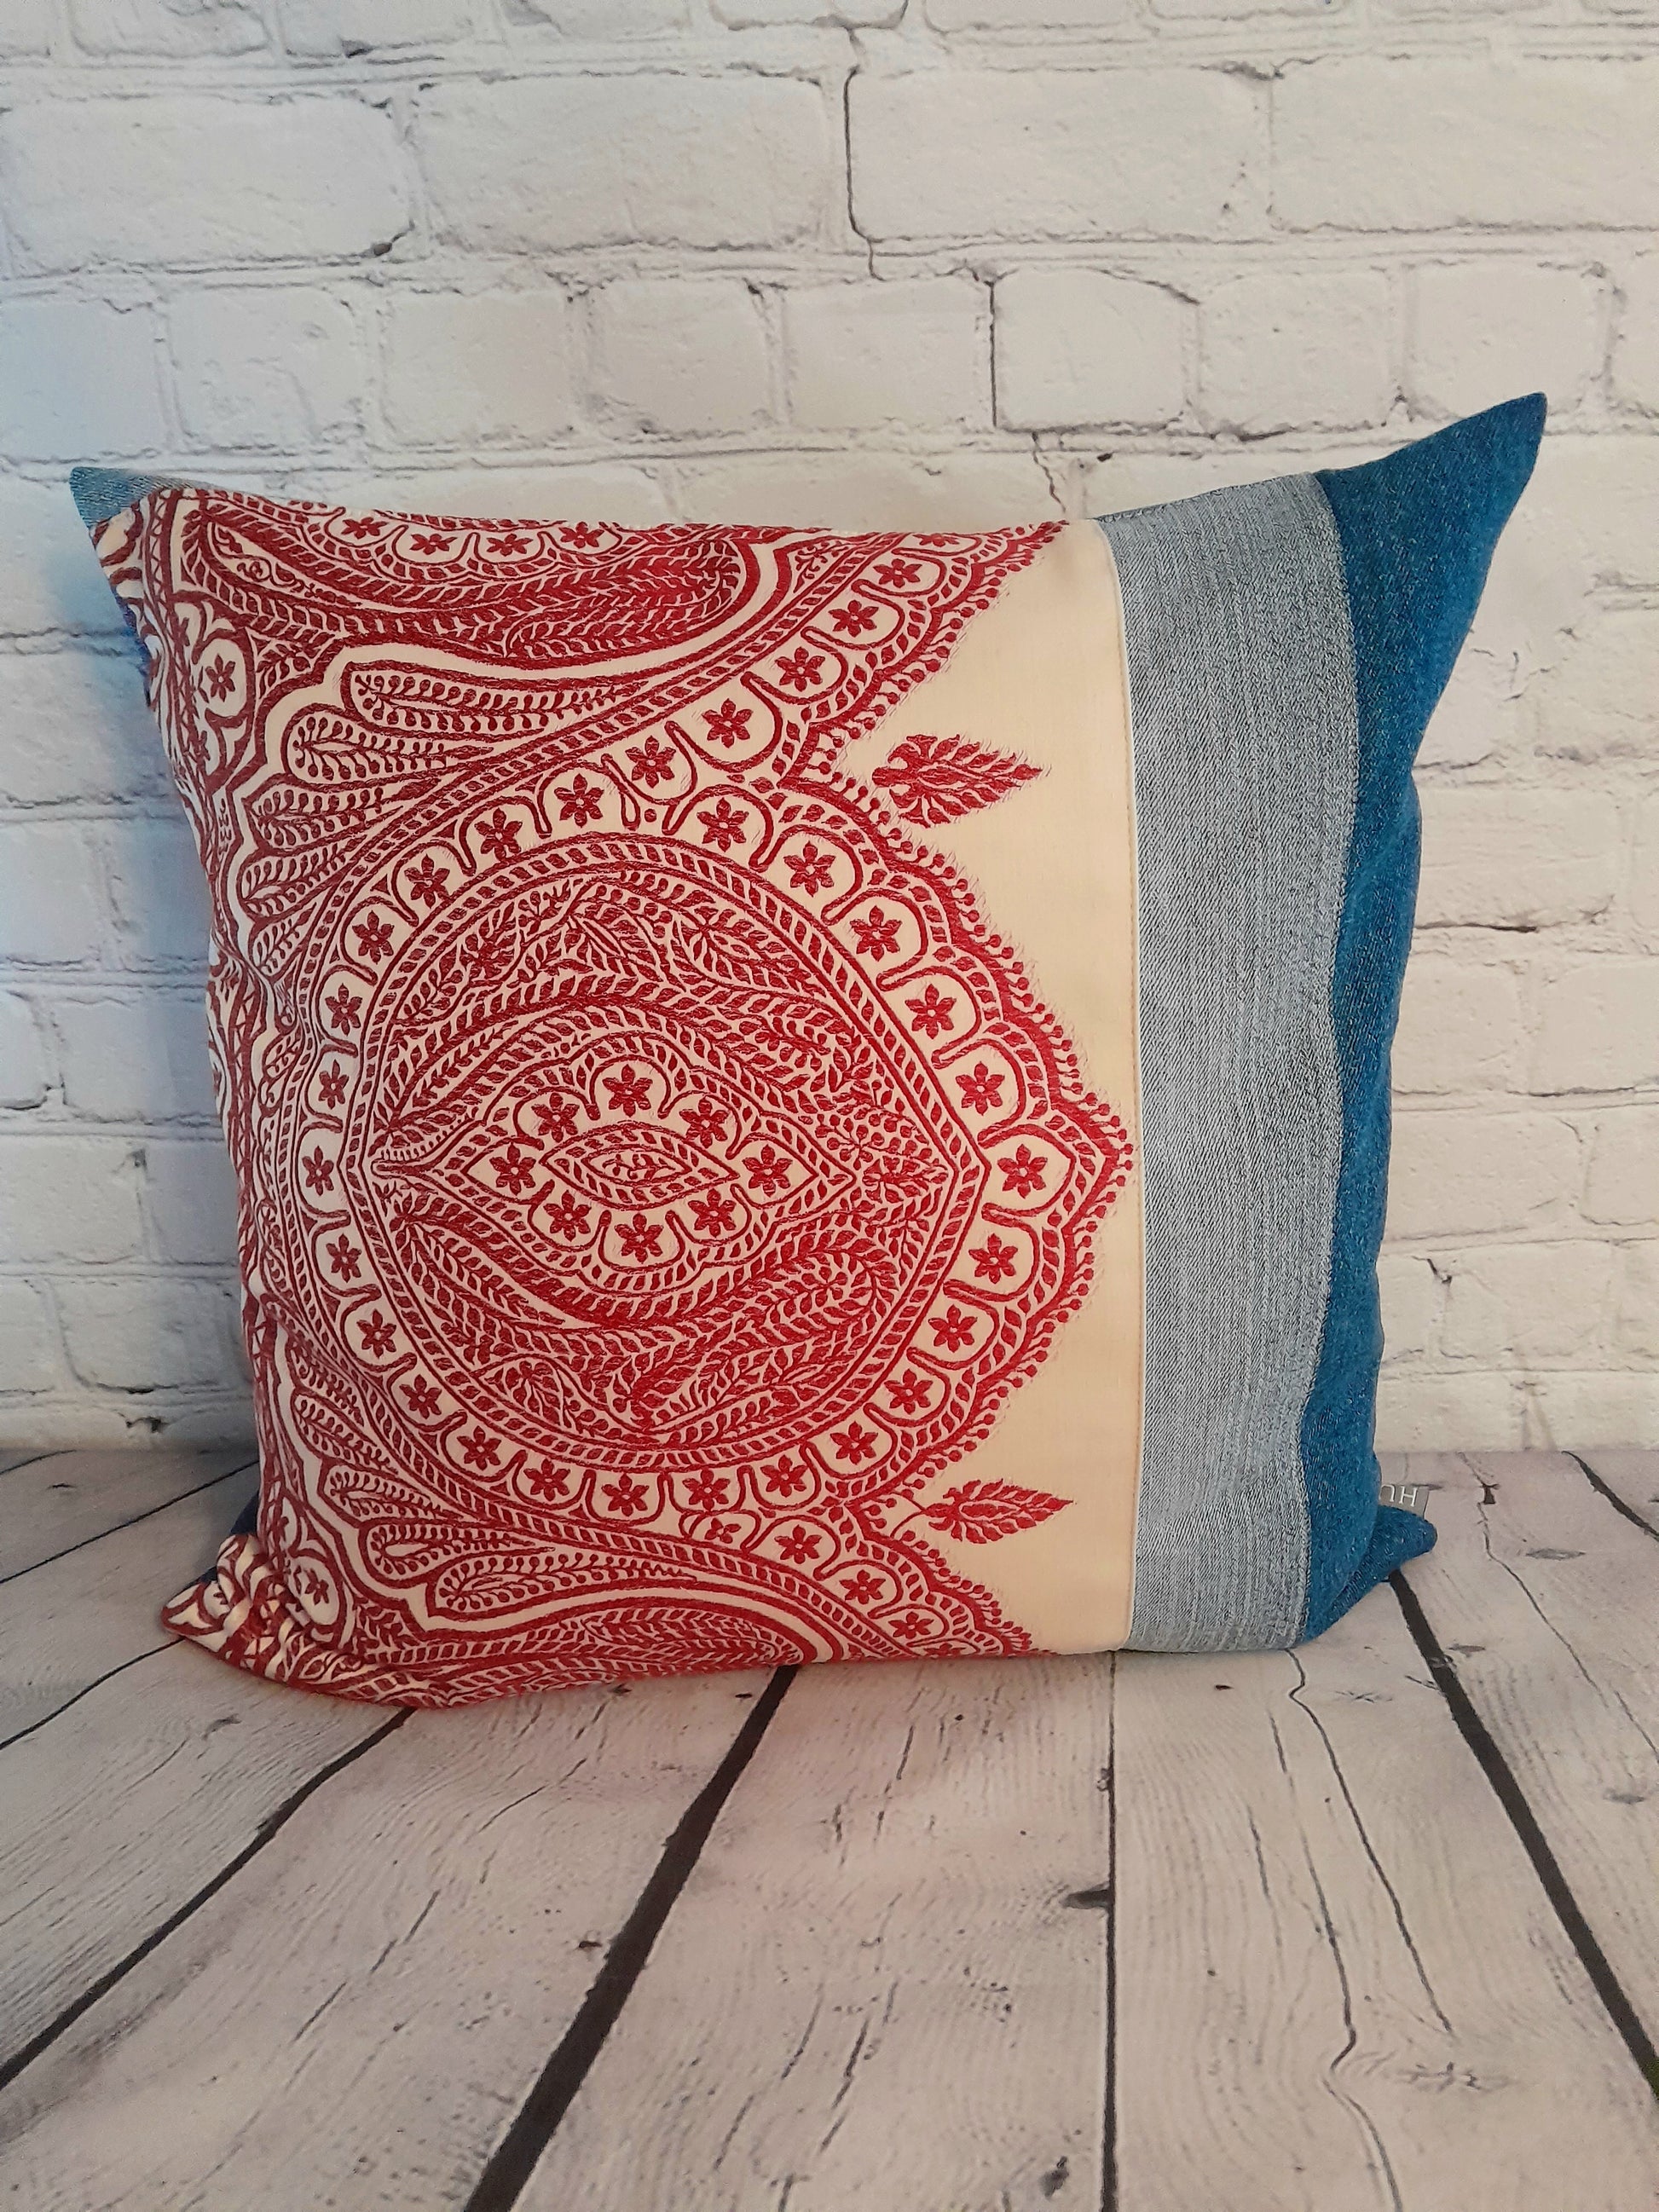 upcycled denim cushion with boho embroidery red cream blue